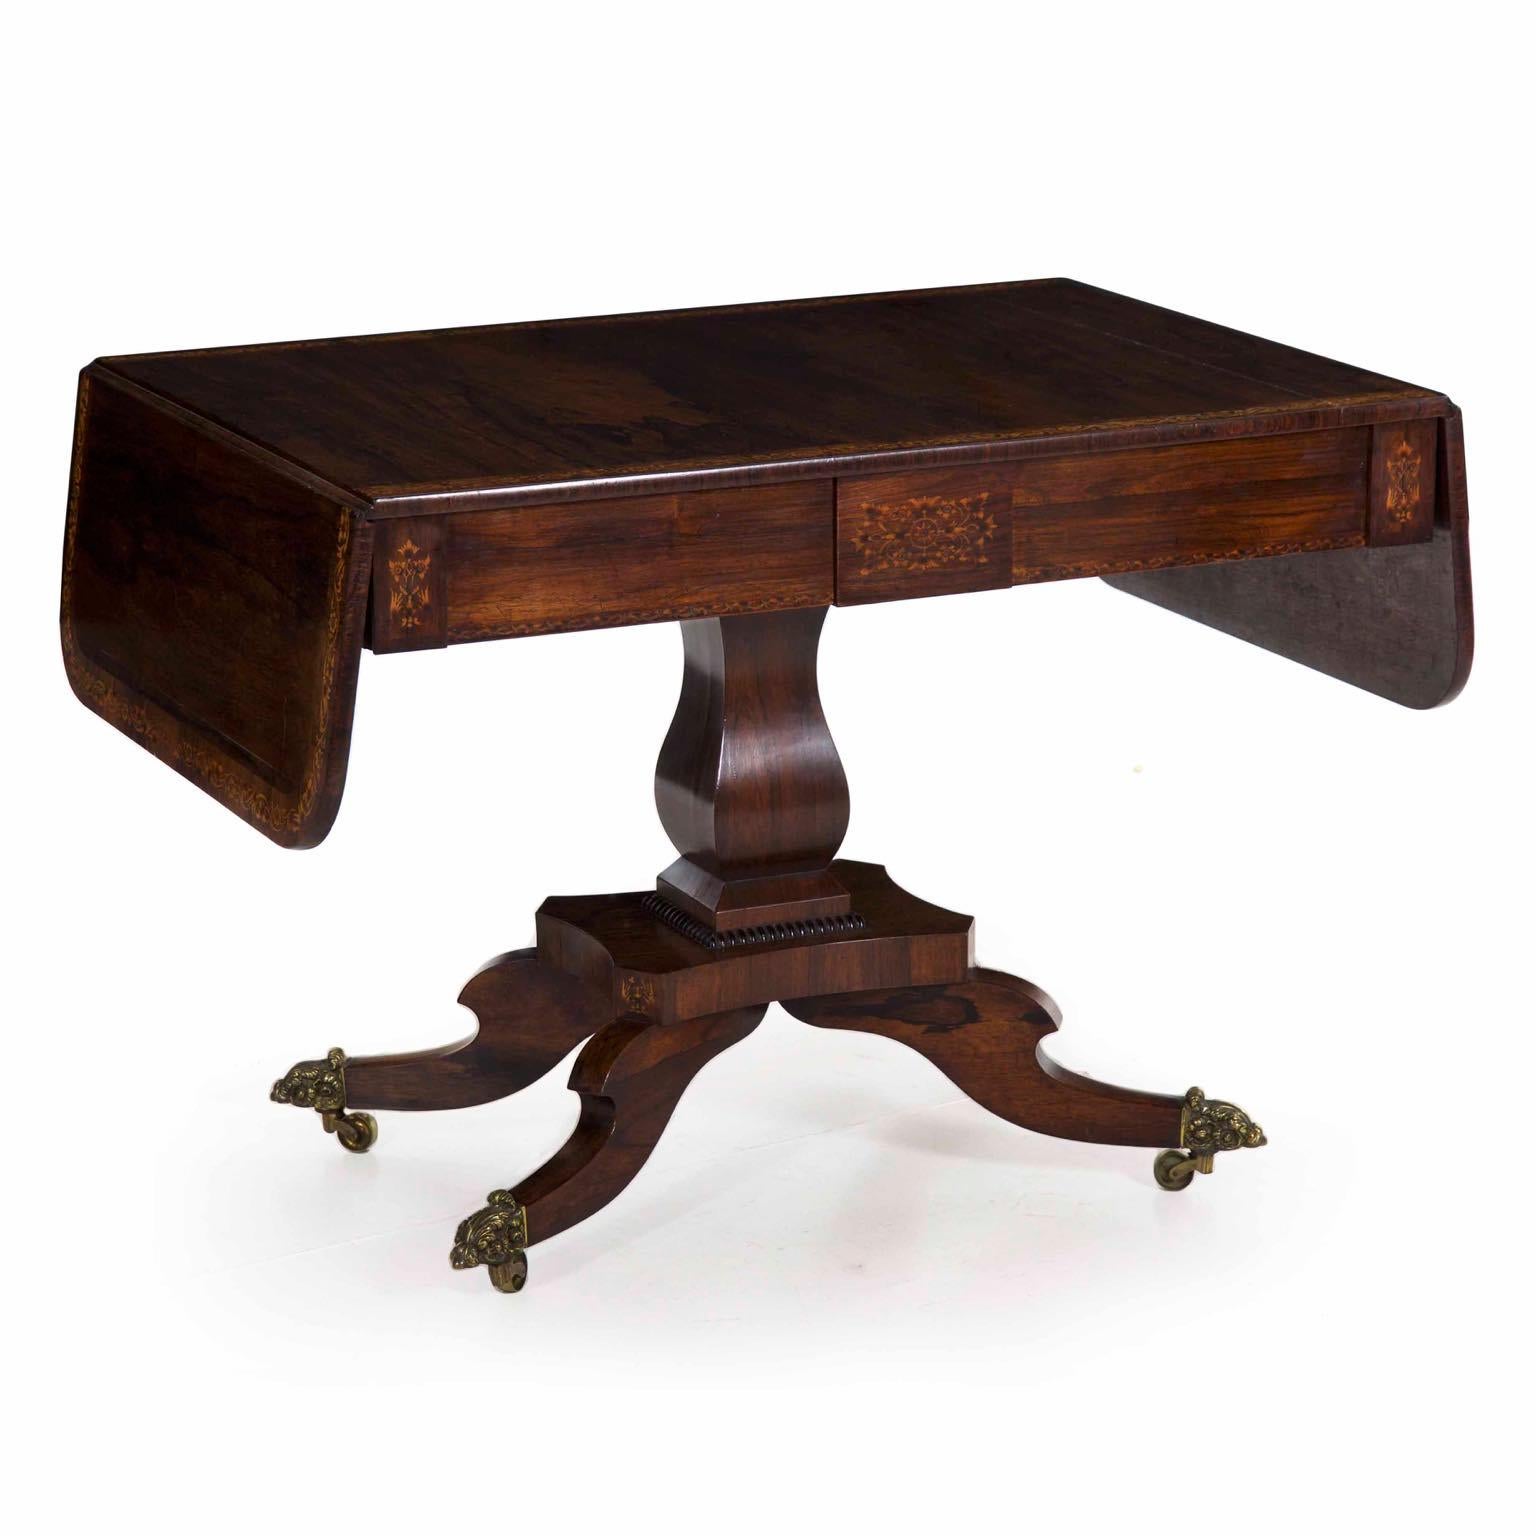 A very fine English Regency inlaid rosewood sofa table
London, circa 1820-1840

A carefully crafted work from the second quarter of the 19th century, this Fine Regency period sofa table is built with precision joinery and the very highest quality